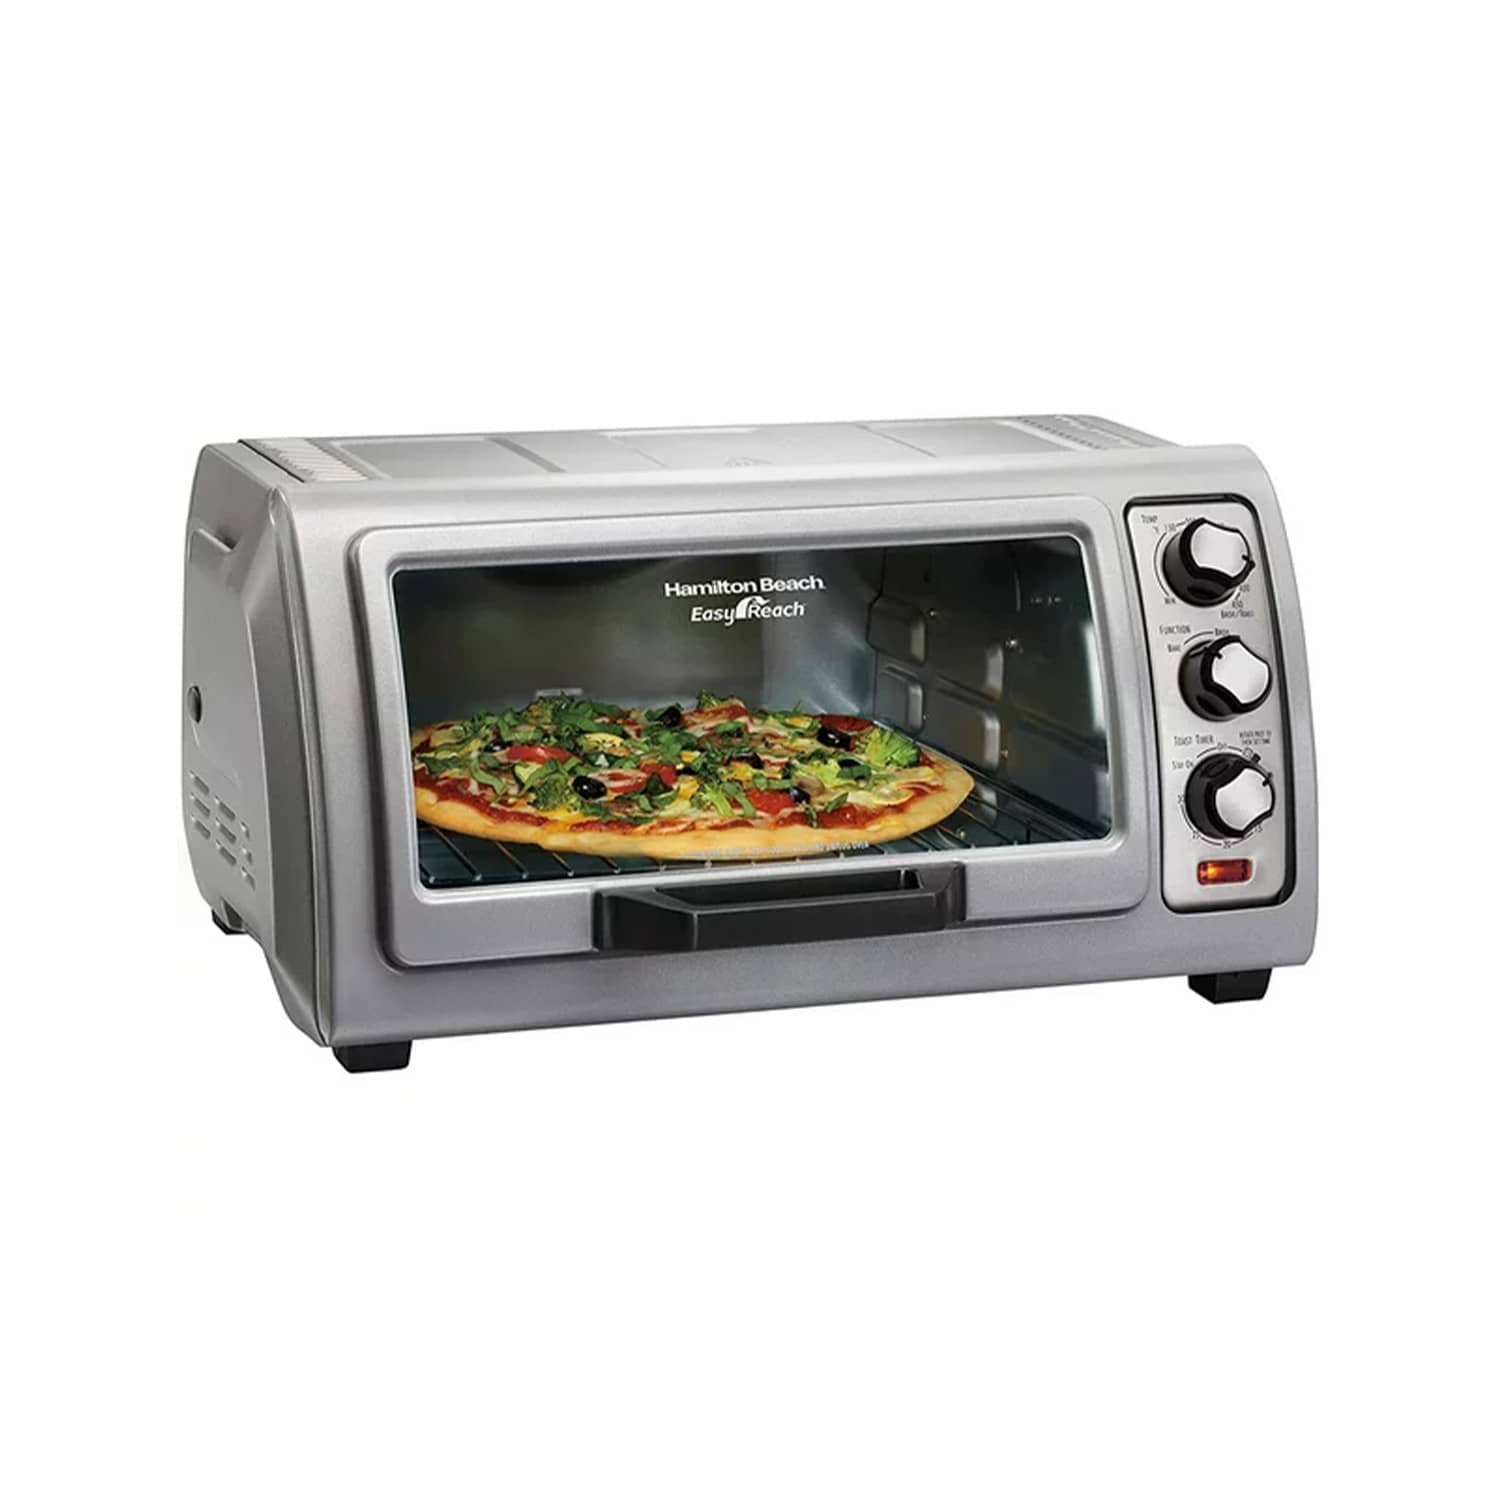 http://cdn.apartmenttherapy.info/image/upload/v1692829664/commerce/product-roundups/2023/2023-08-best-small-ovens/hamilton-beach-6-slice-countertop-toaster-oven.jpg